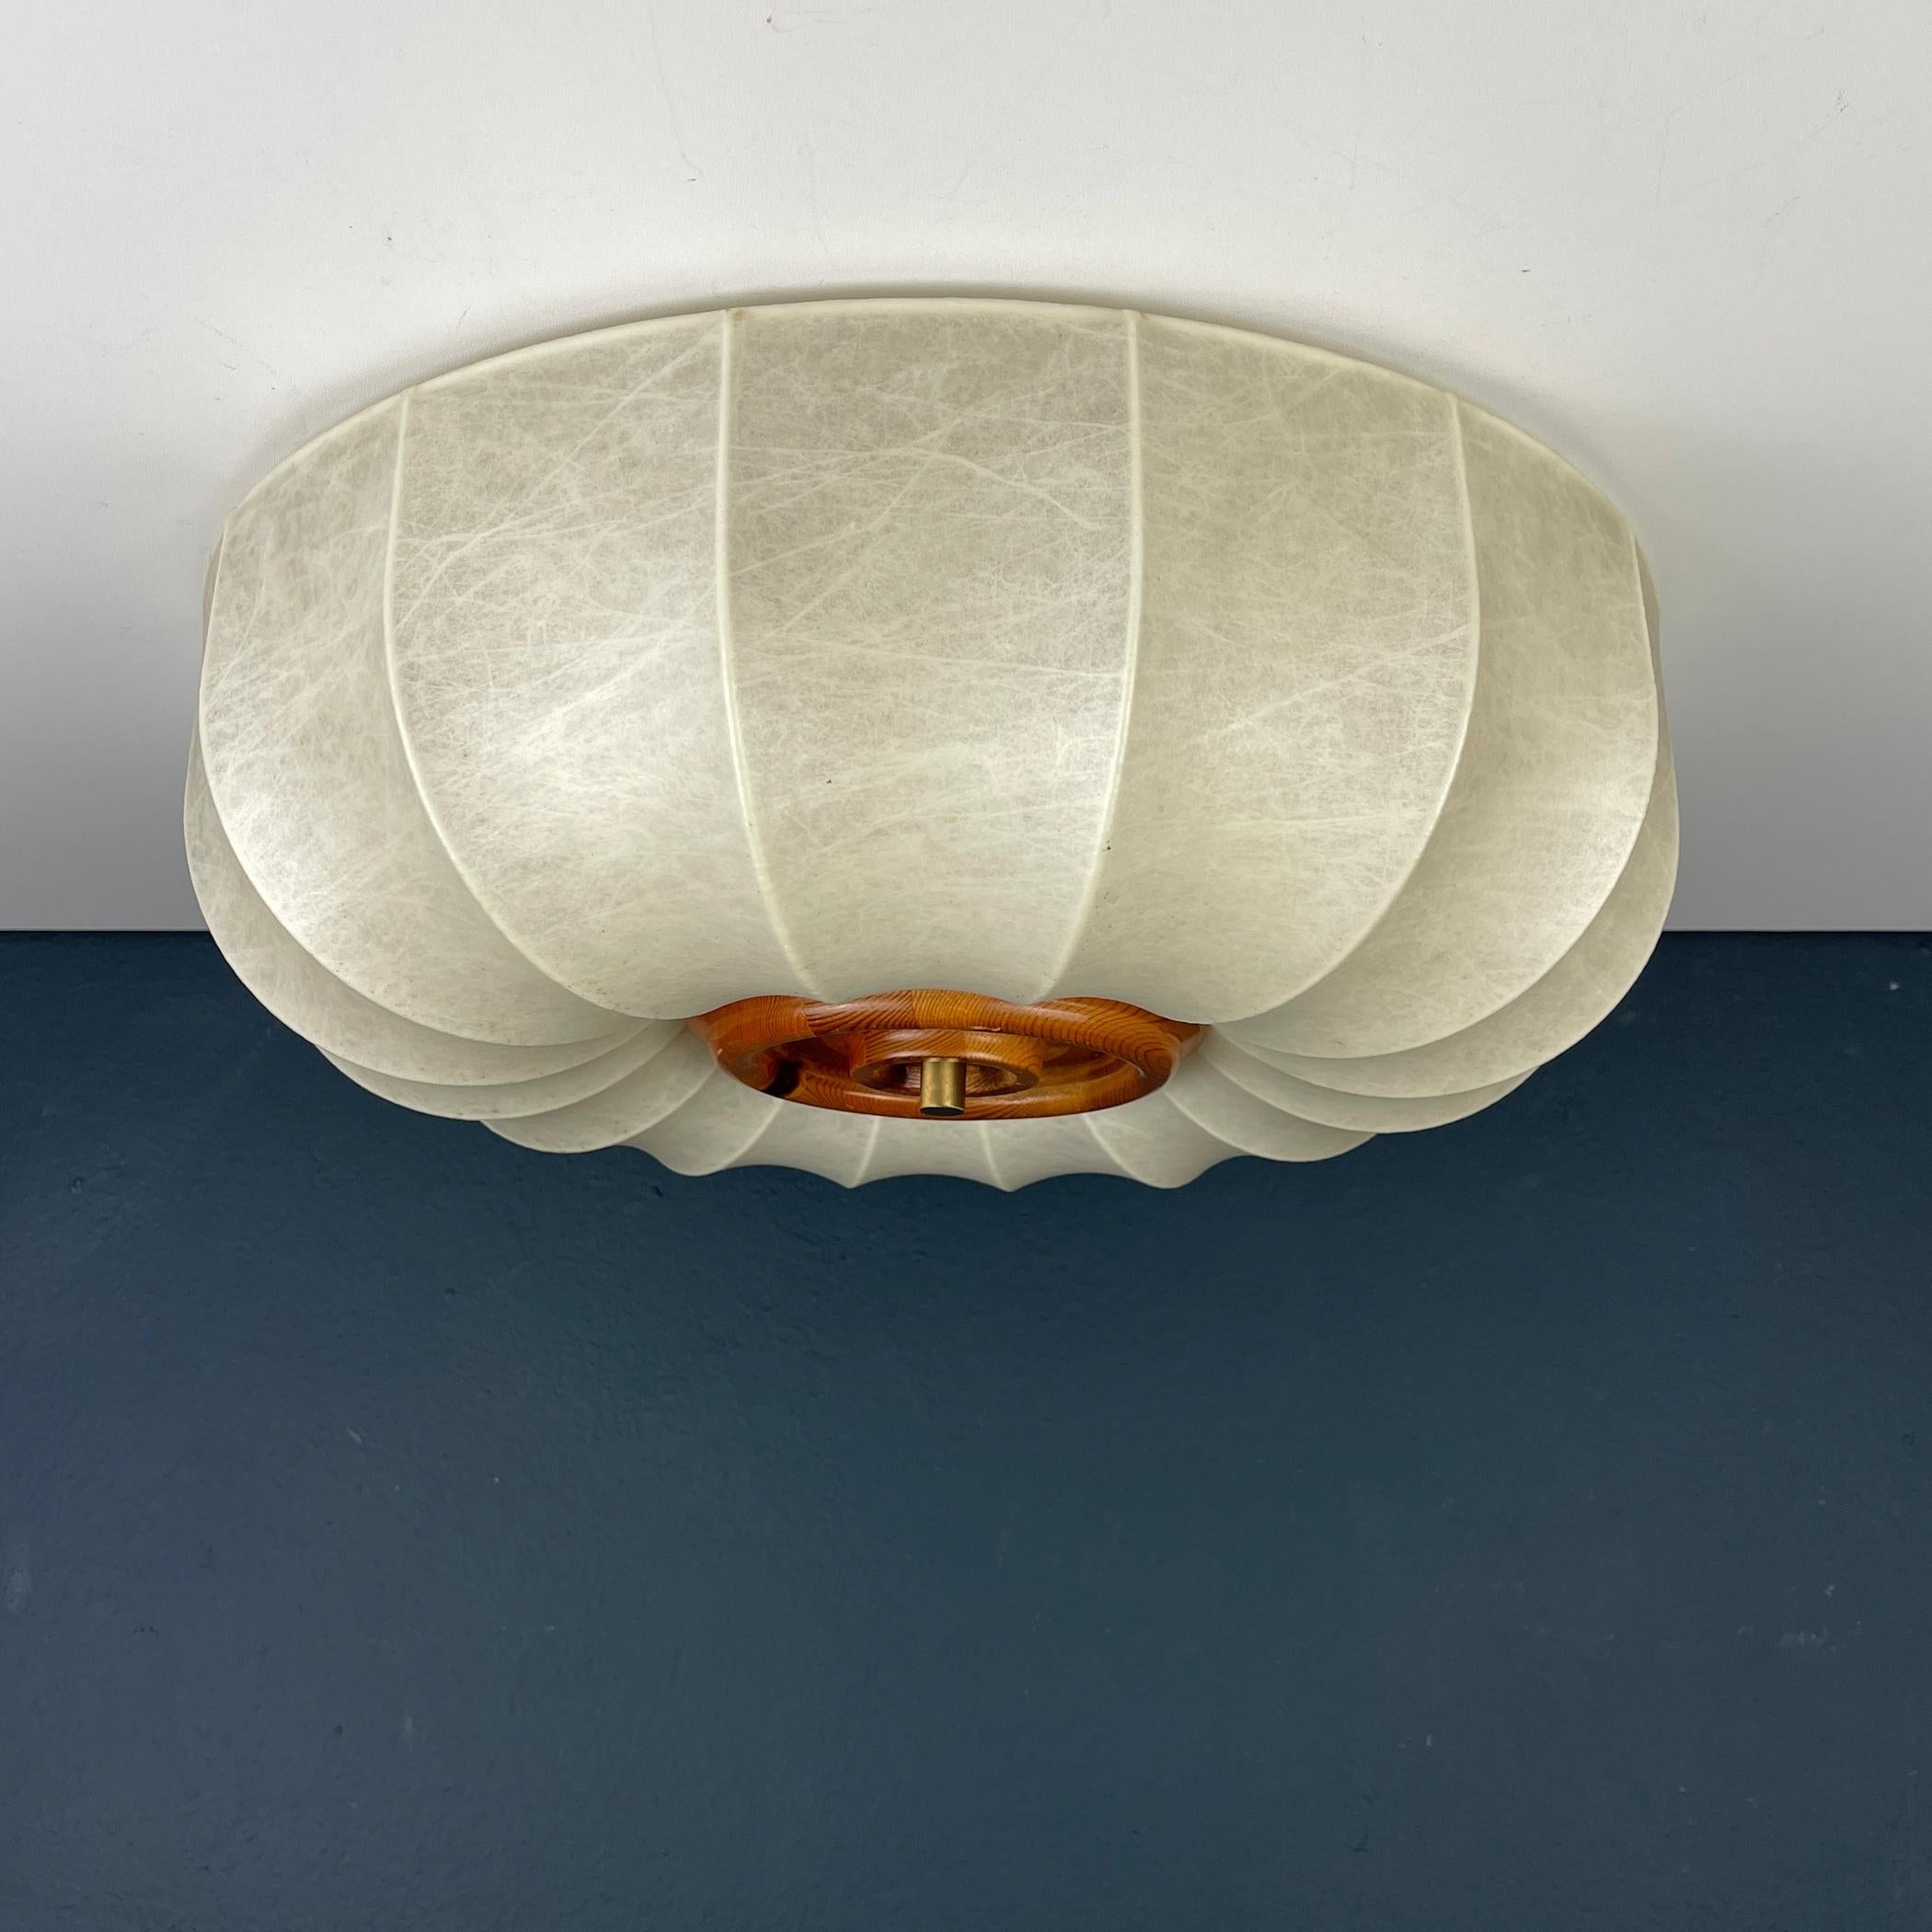 The Cocoon Ceiling Lamp, designed by Friedel Wauer for Goldkant Leuchten in Germany in the 1960s, is a significant example of lighting design from that era. The history of Cocoon lamps is intertwined with the post-war revival of design and